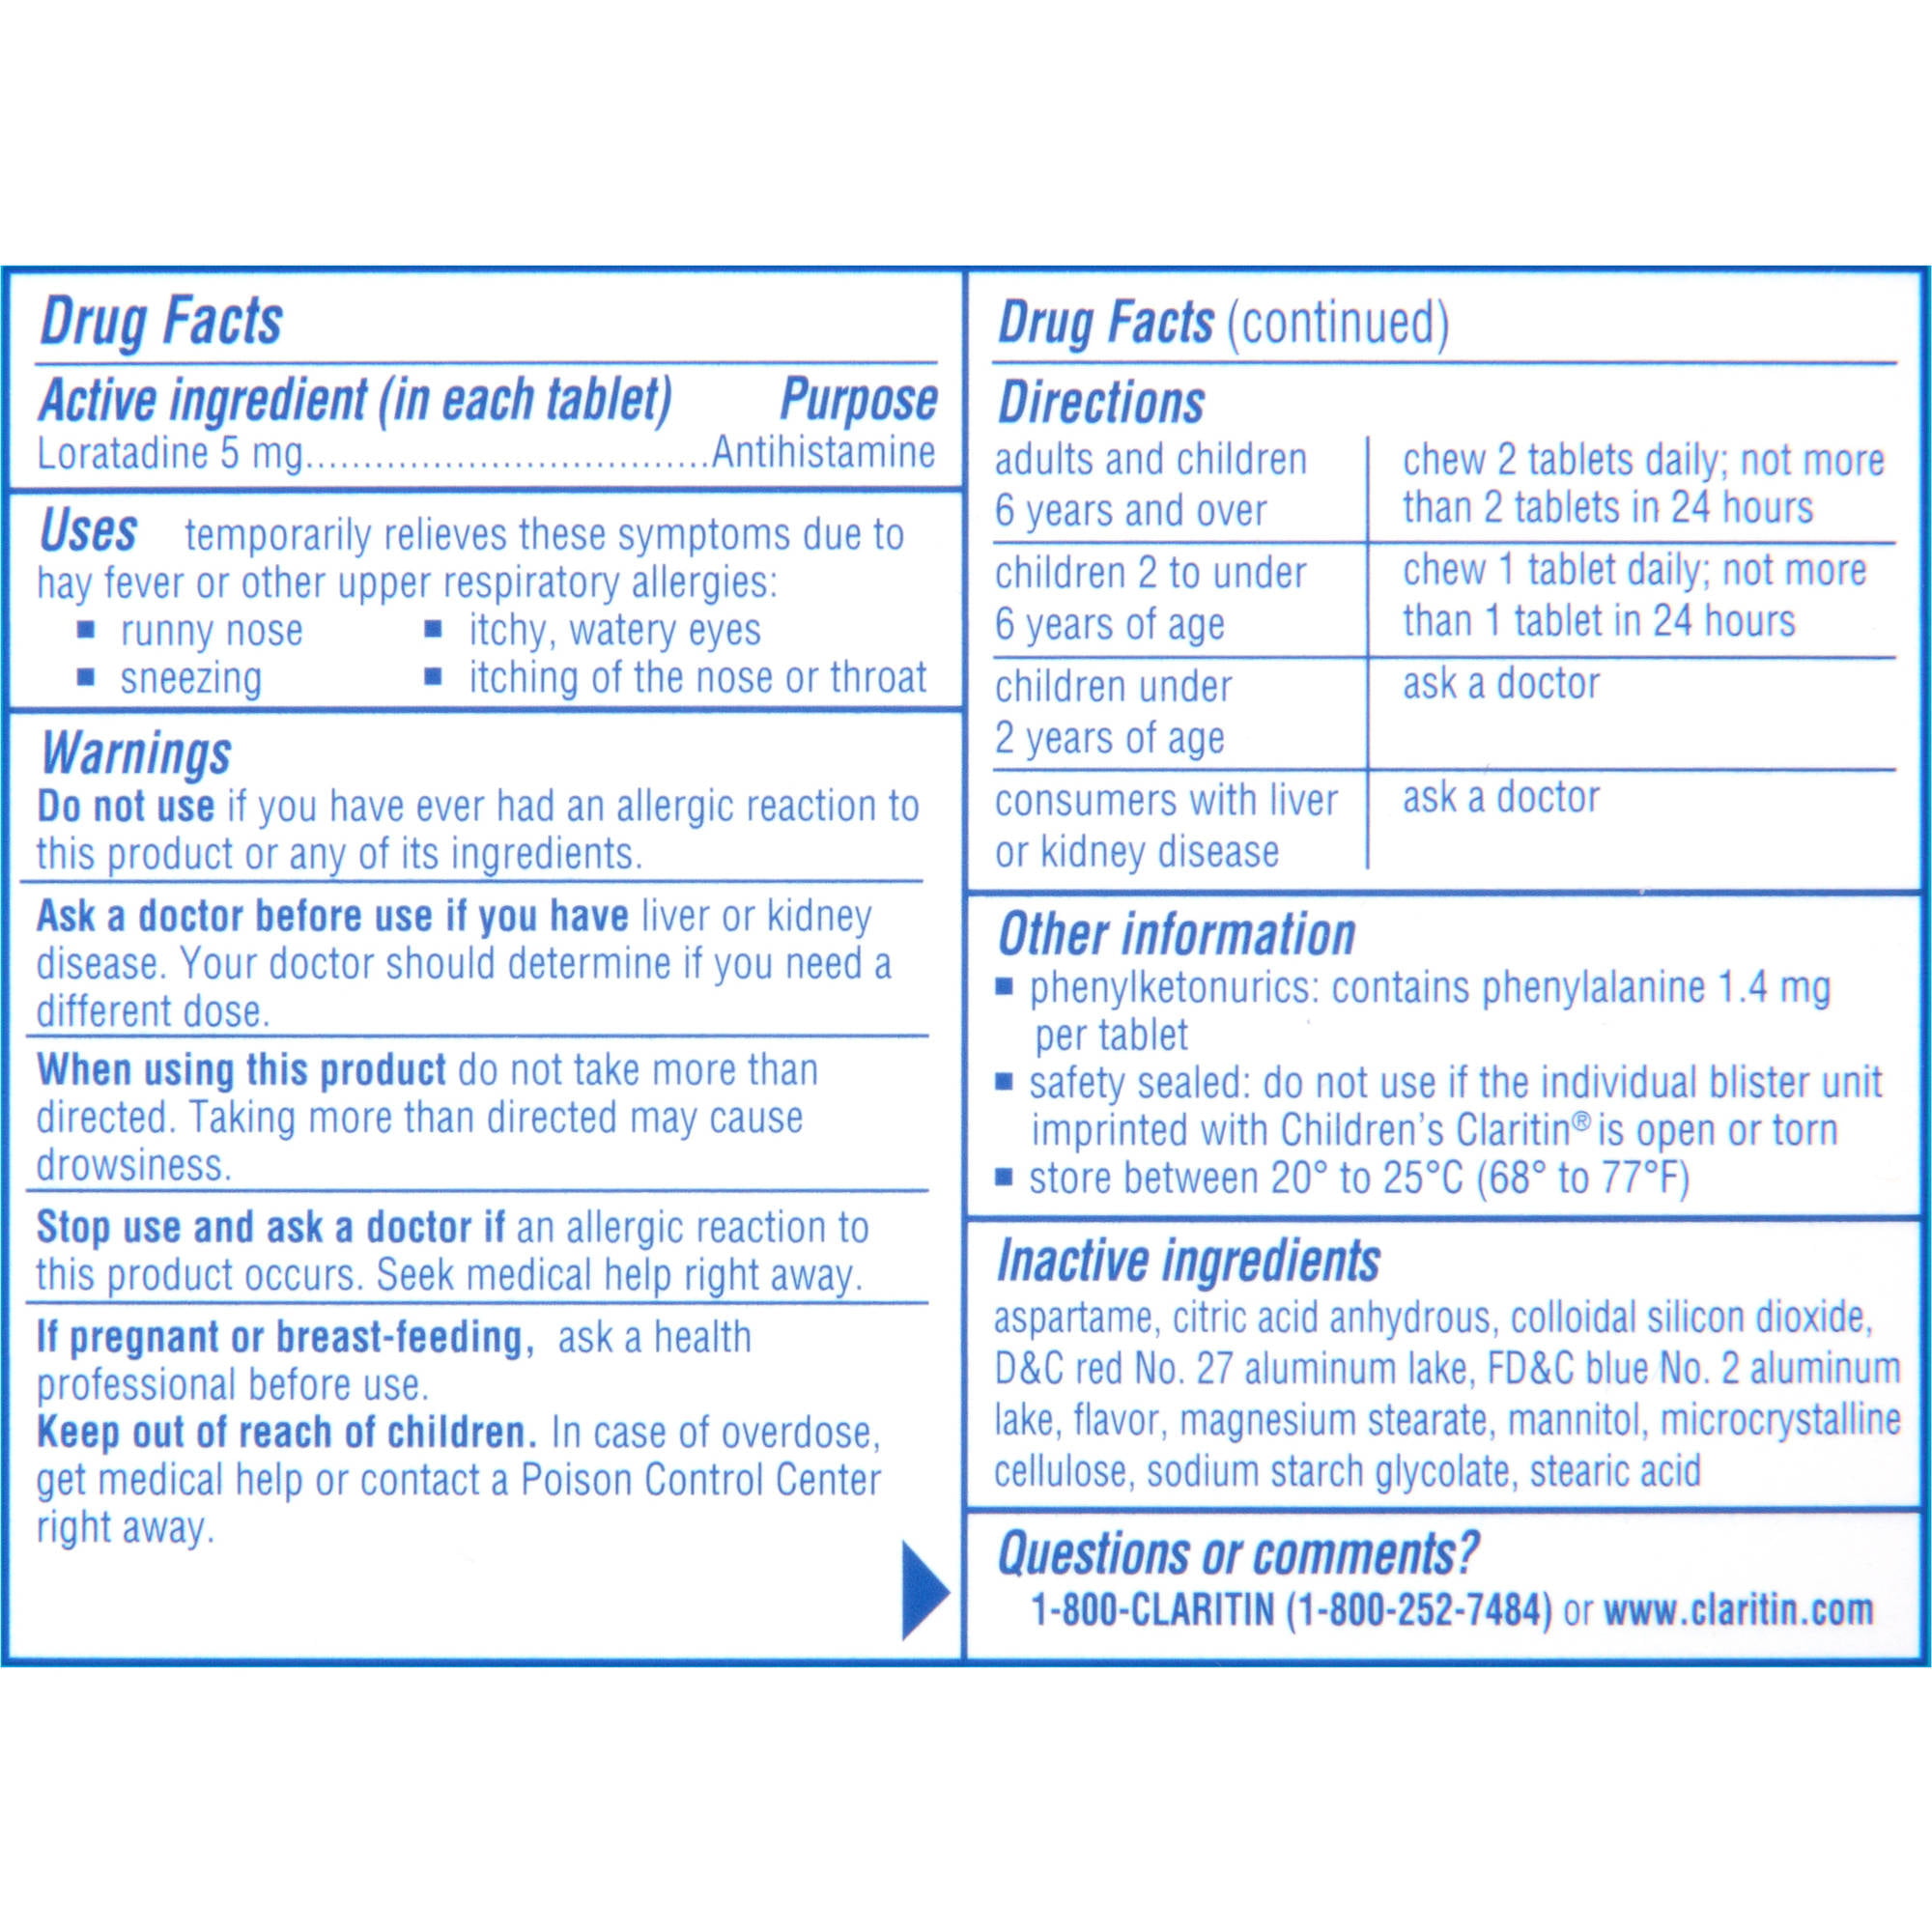 trazodone dosage for dogs chart